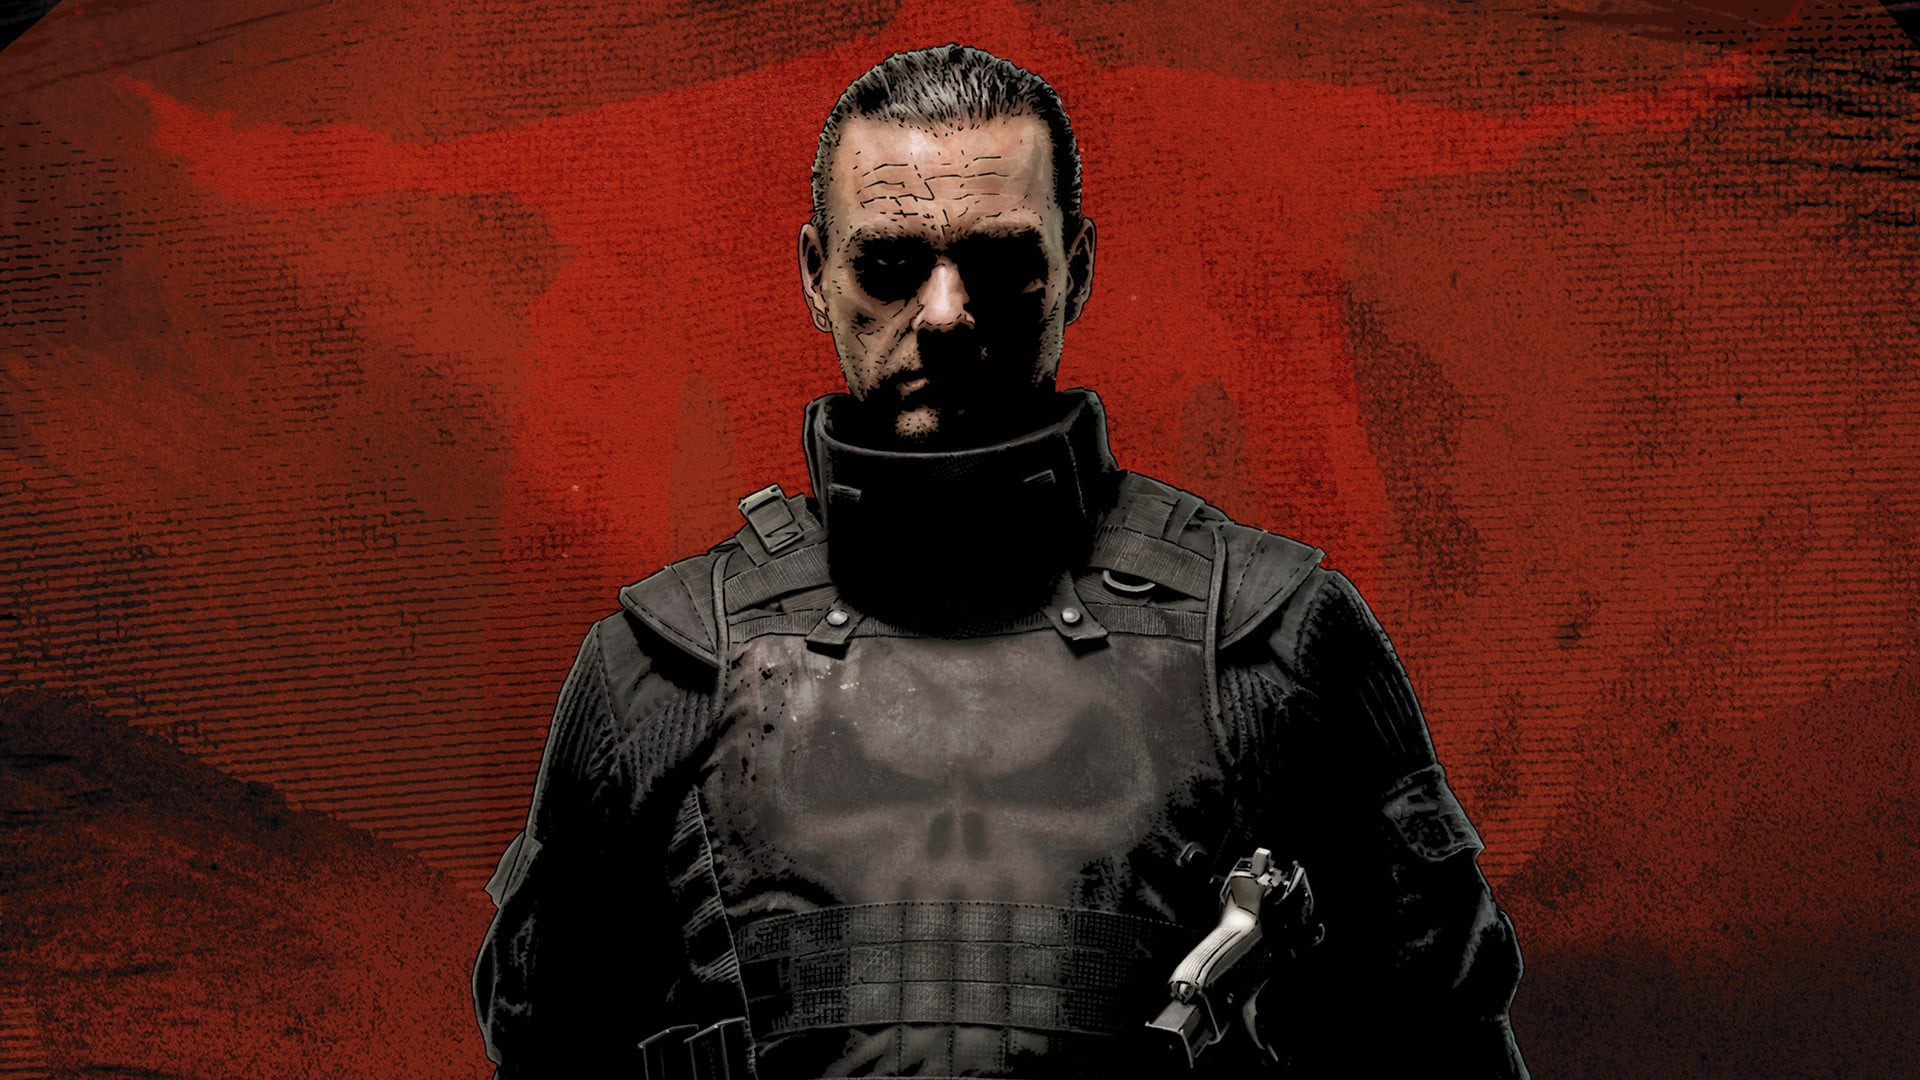 Punisher War Zone: The CBR Review